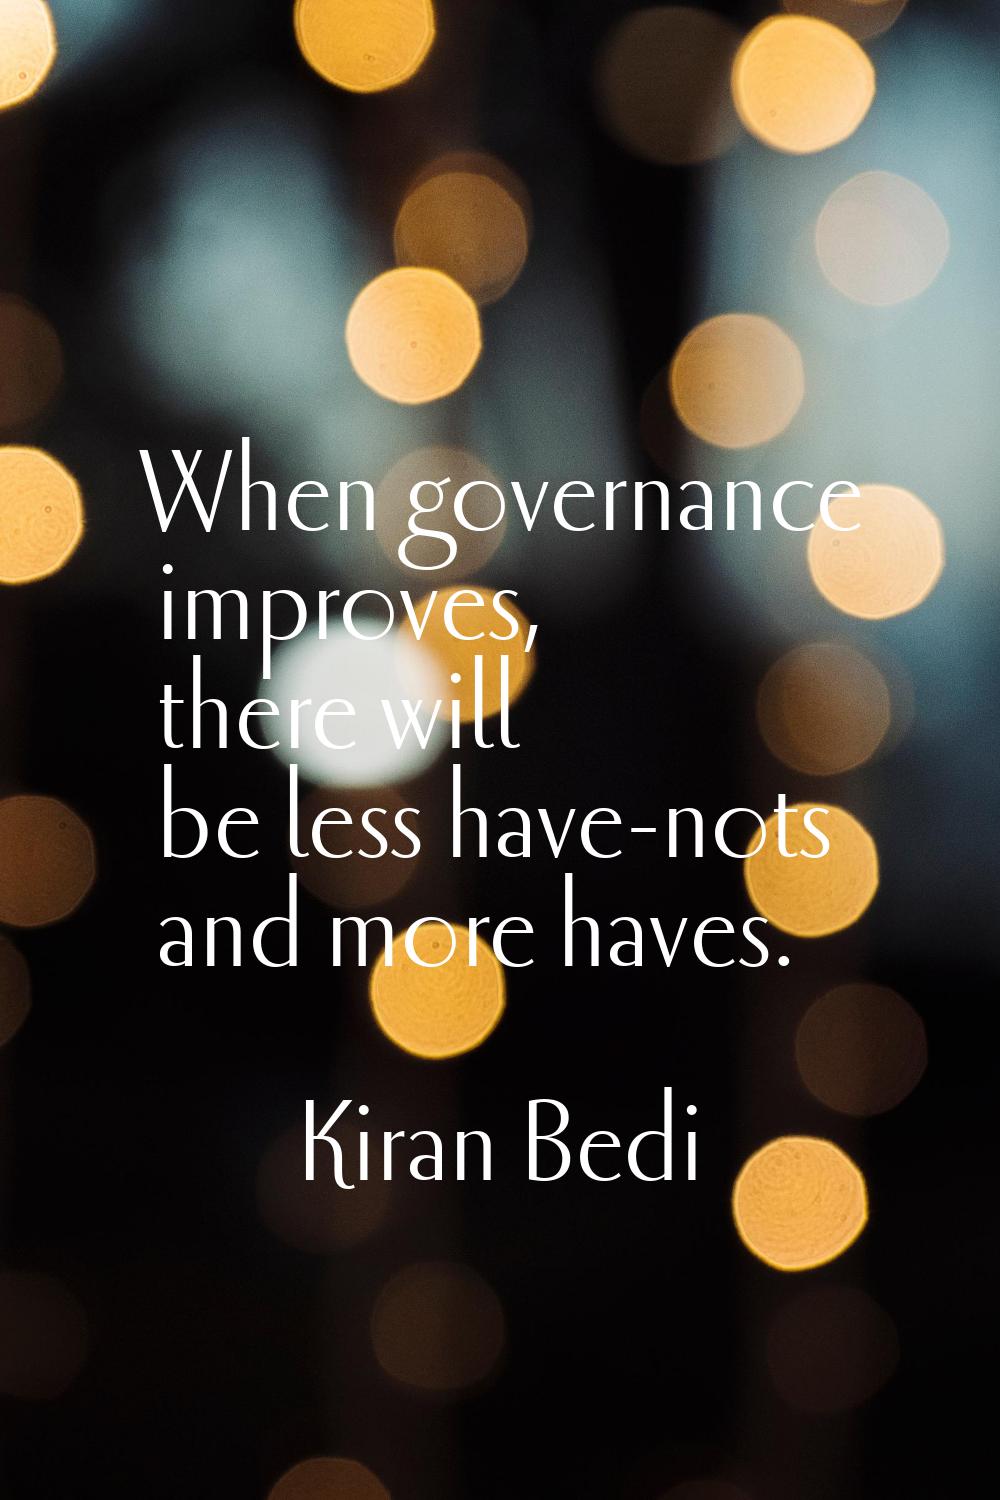 When governance improves, there will be less have-nots and more haves.